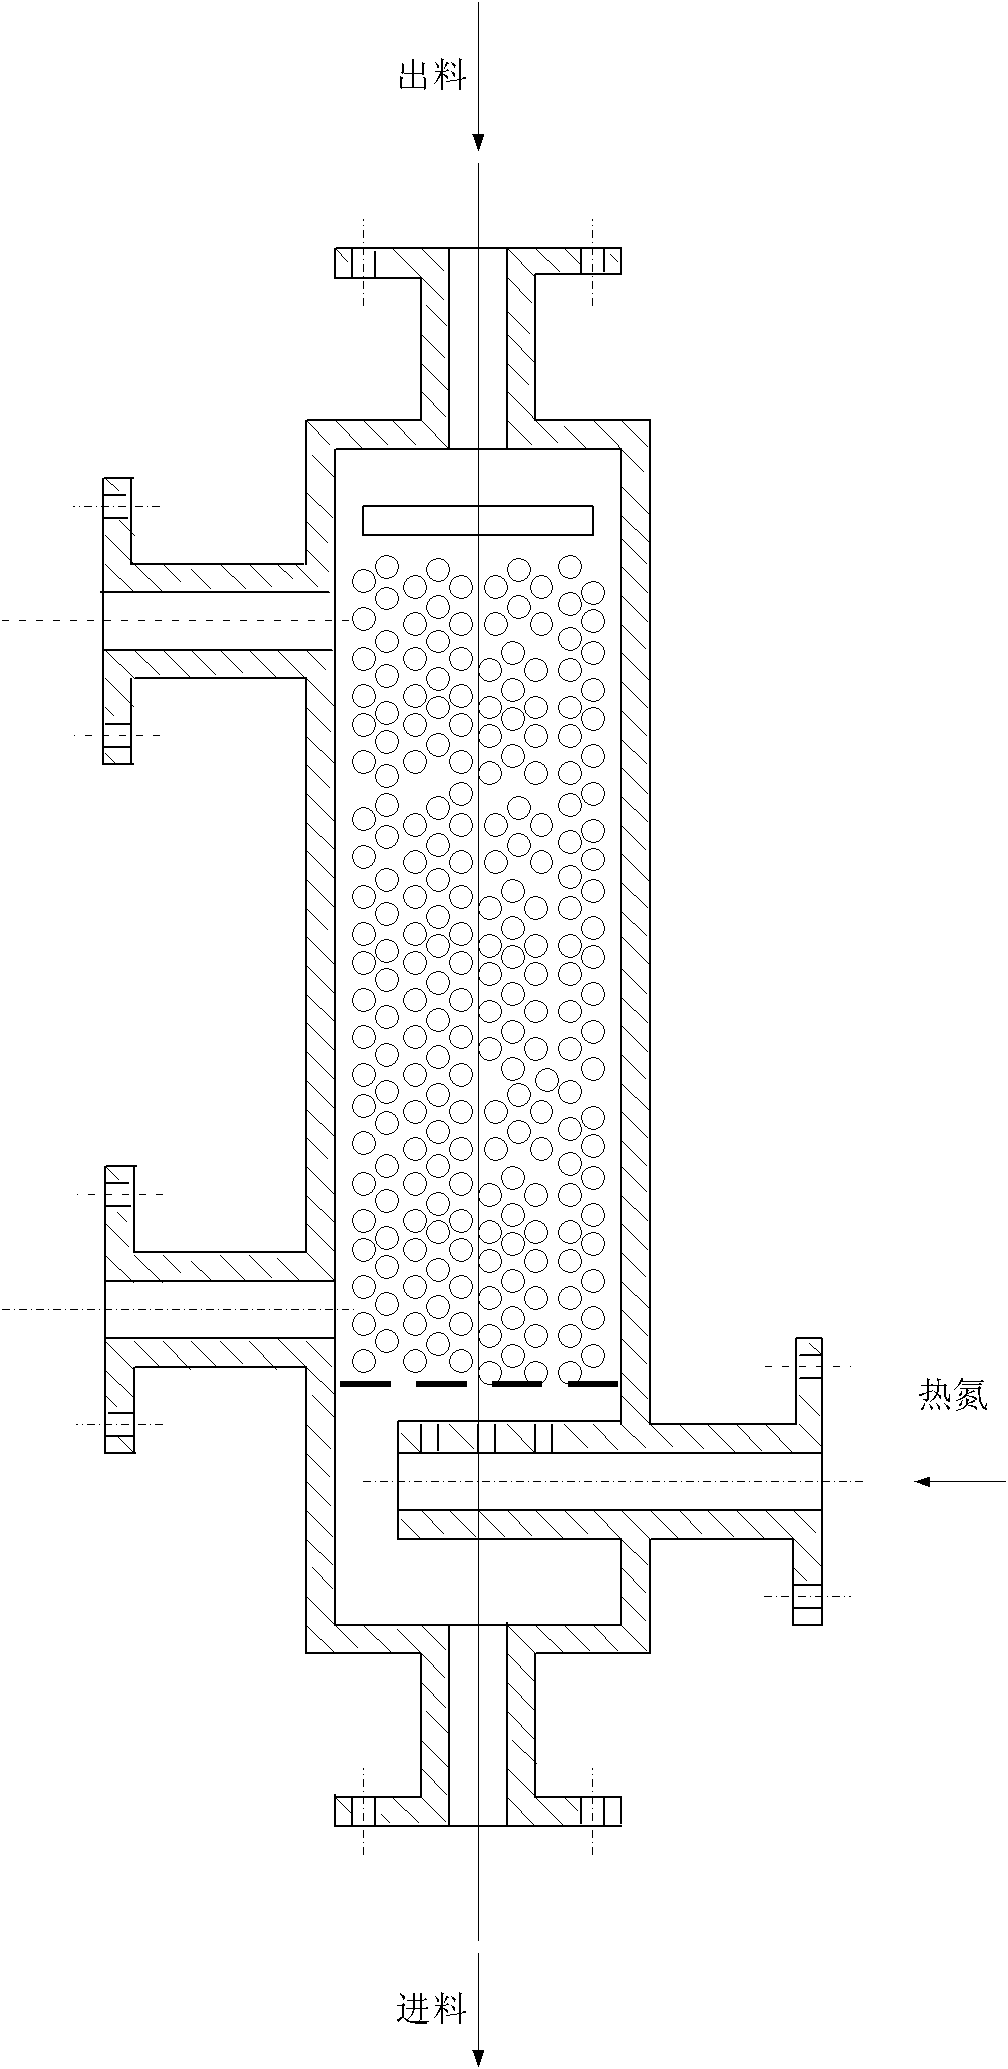 Method and device for reducing volatile matters of o-cresol-formaldehyde epoxy resin